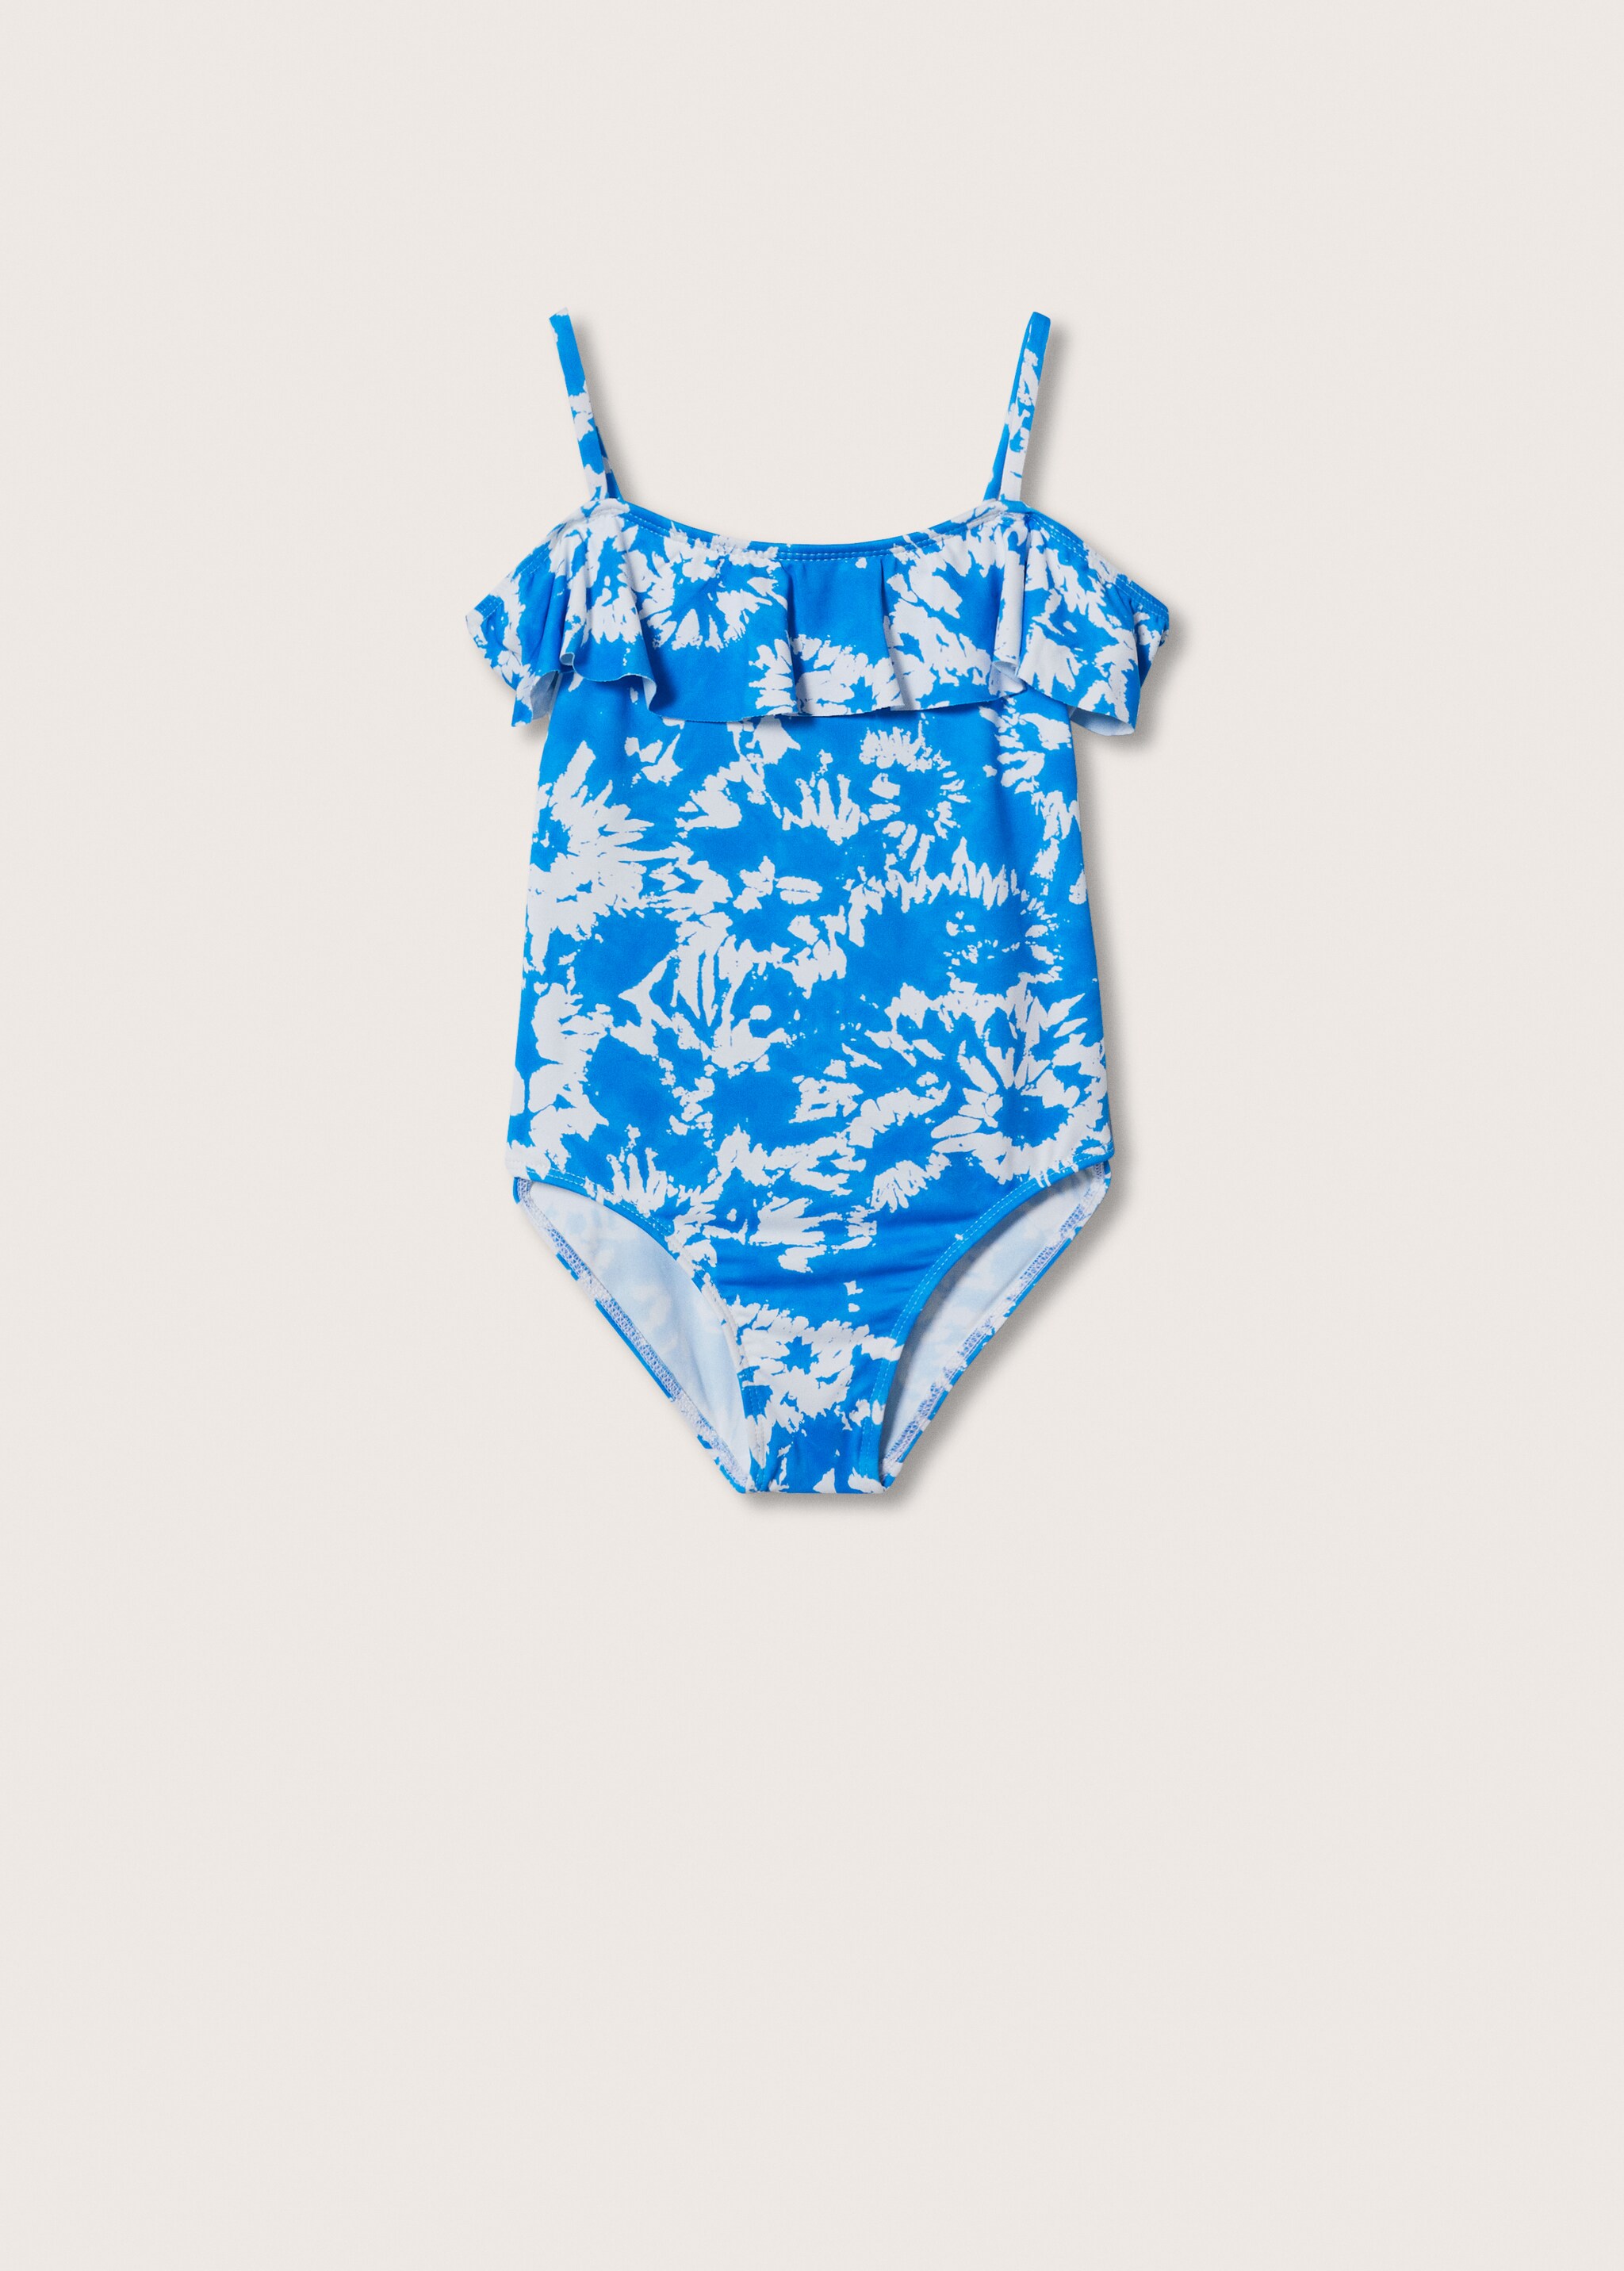 Tie-dye print swimsuit - Article without model